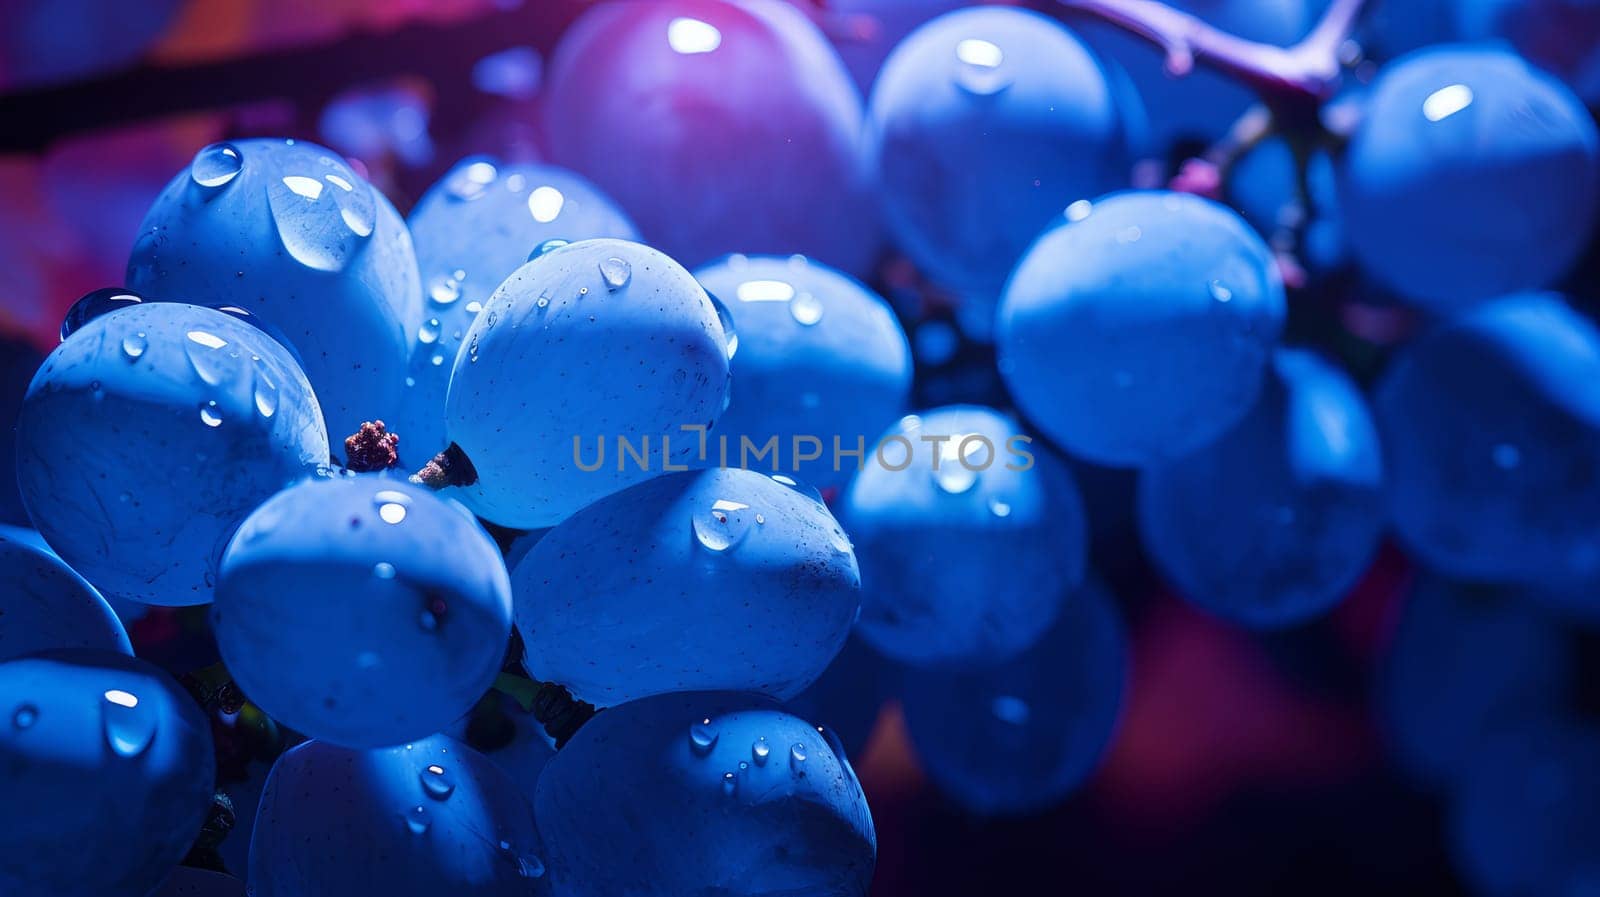 Blue black grapes with water drops, close-up background. by Alla_Yurtayeva